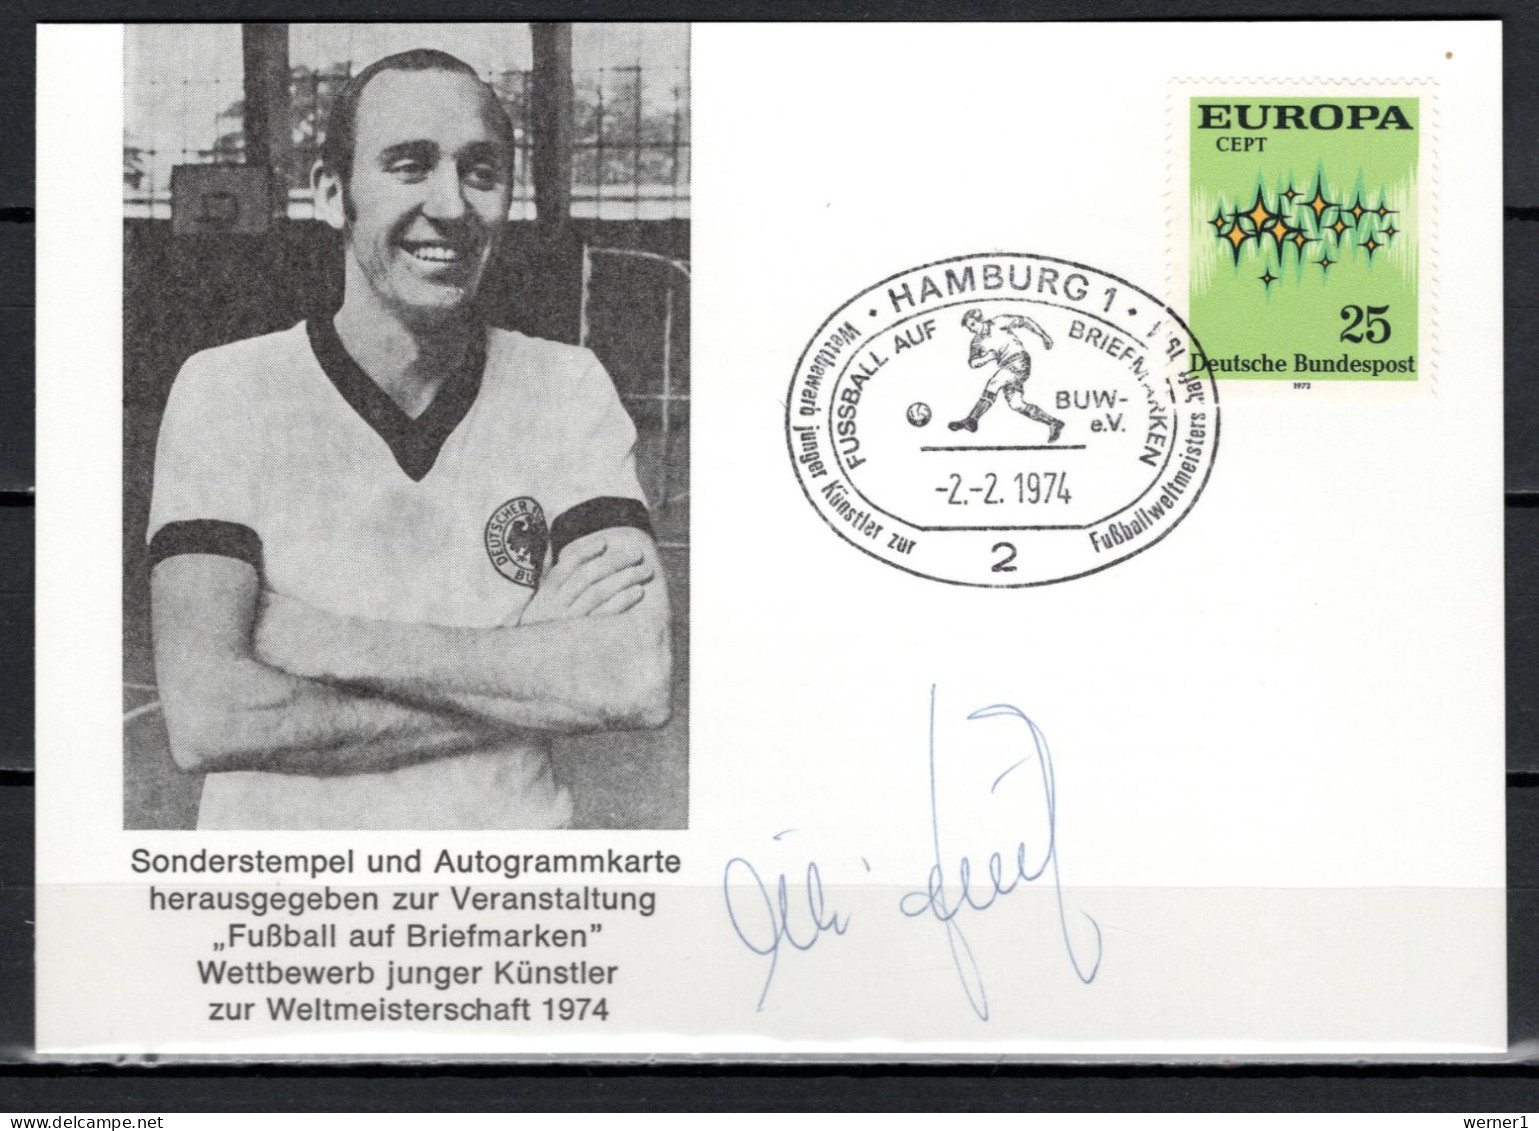 Germany 1974 Football Soccer World Cup Autograph Postcard With Original Signature Of Willi Schulz - 1974 – West Germany